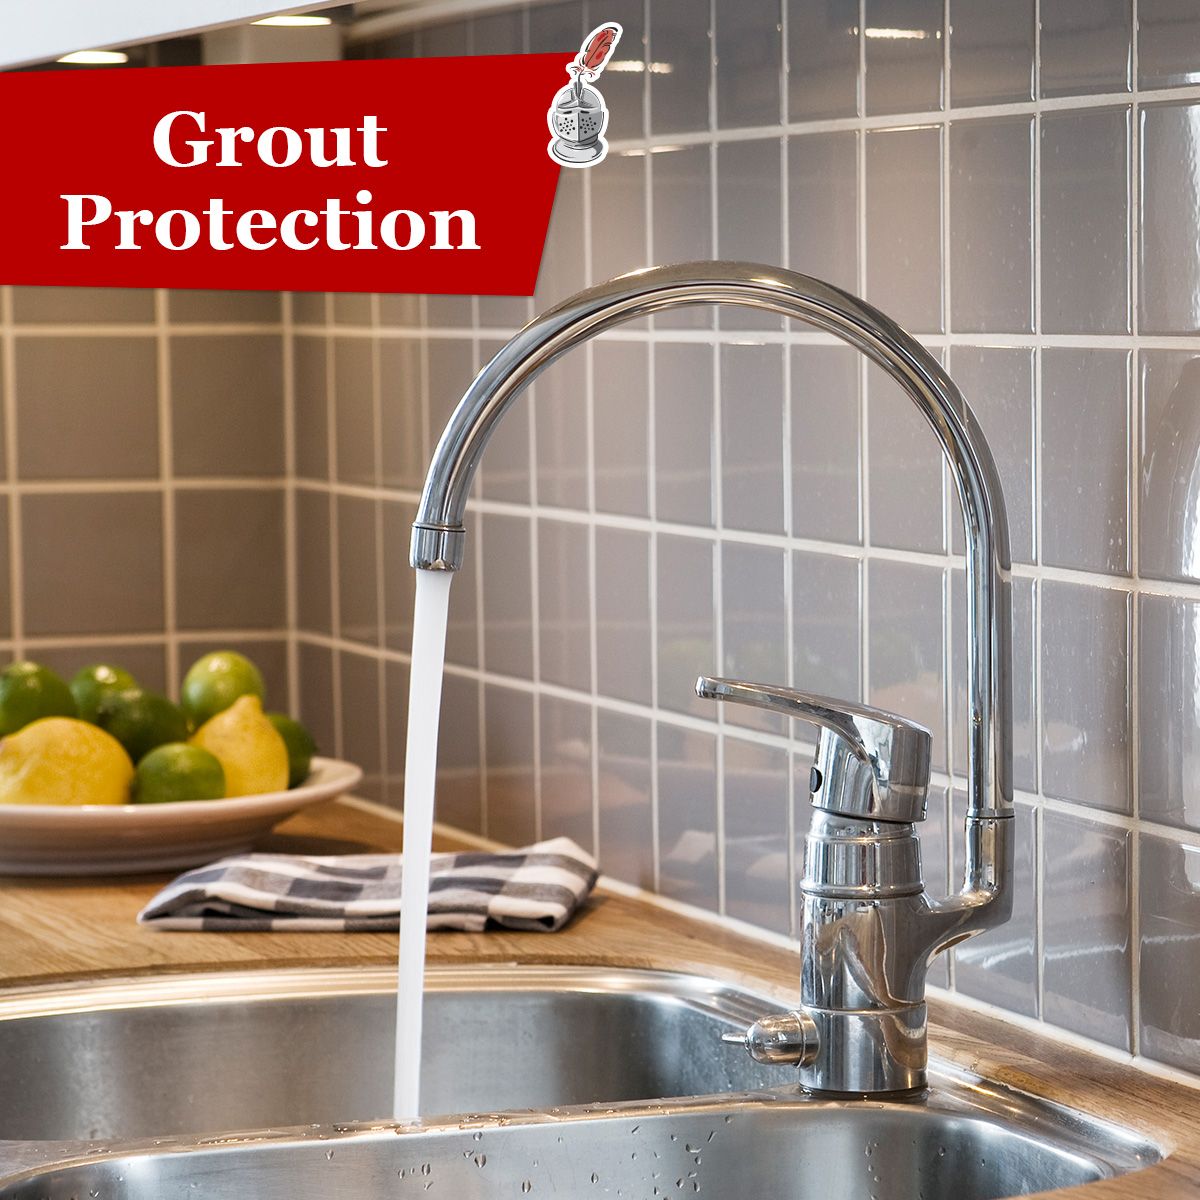 Grout Protection